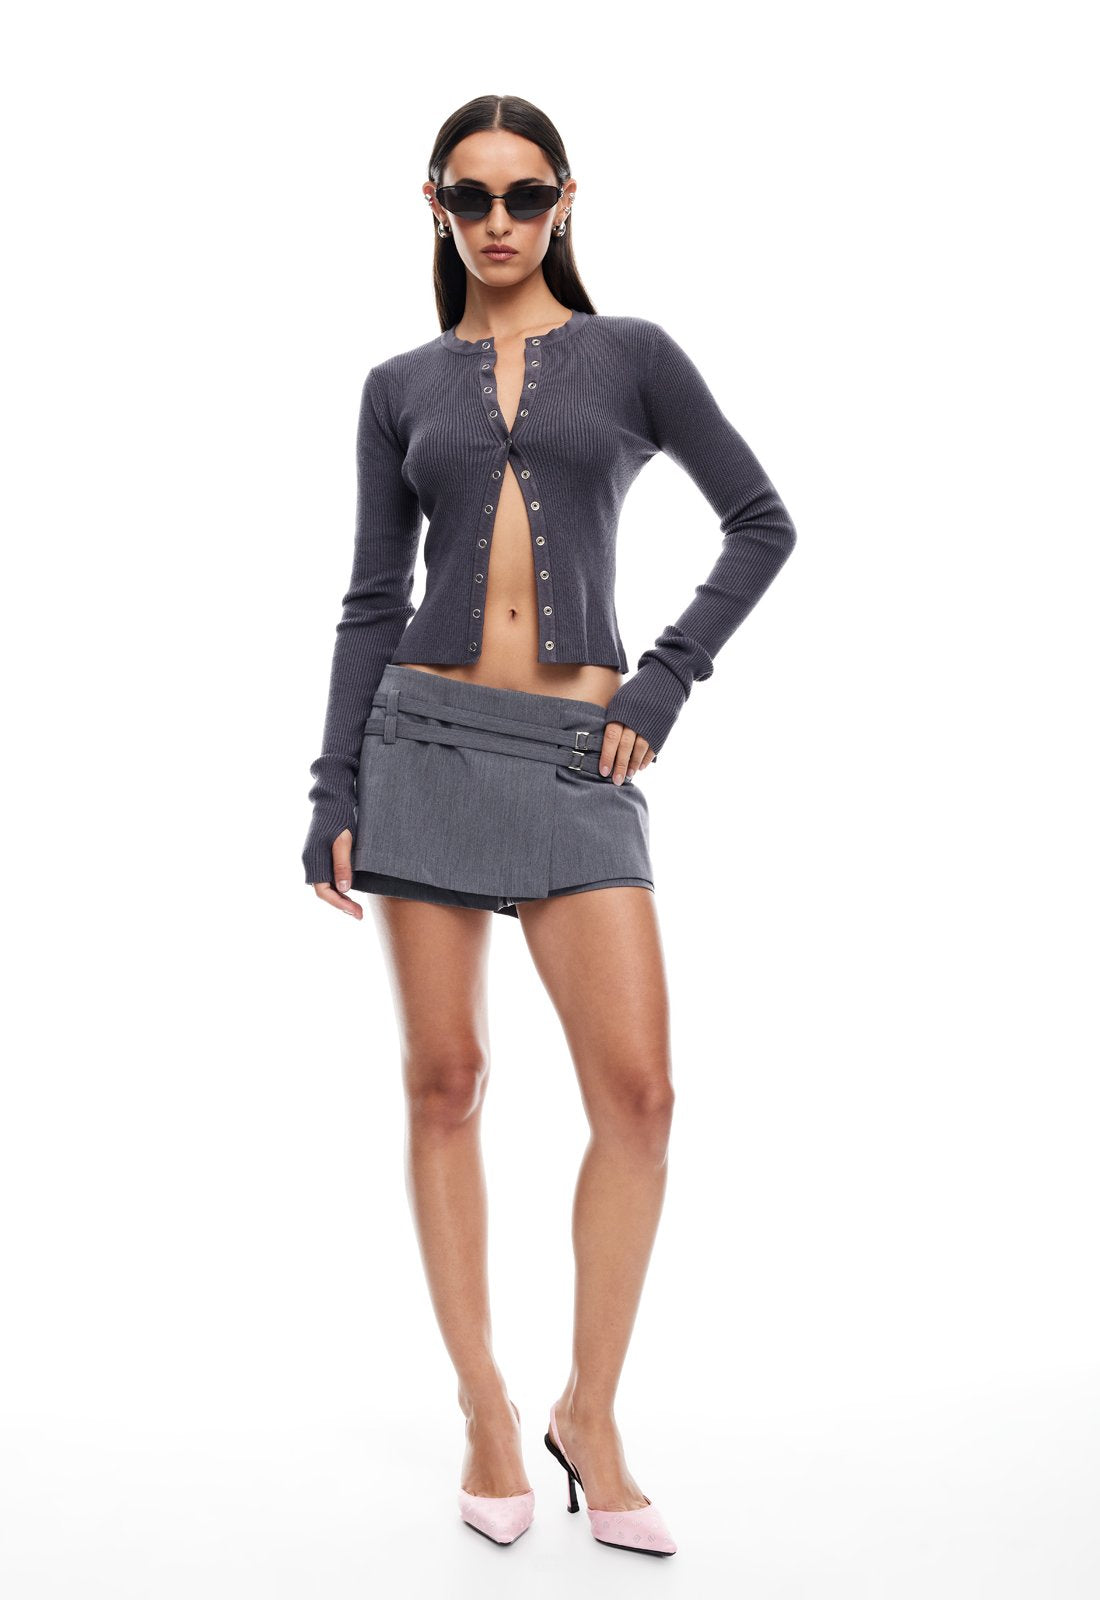 IVY LEAGUE TOP - CHARCOAL